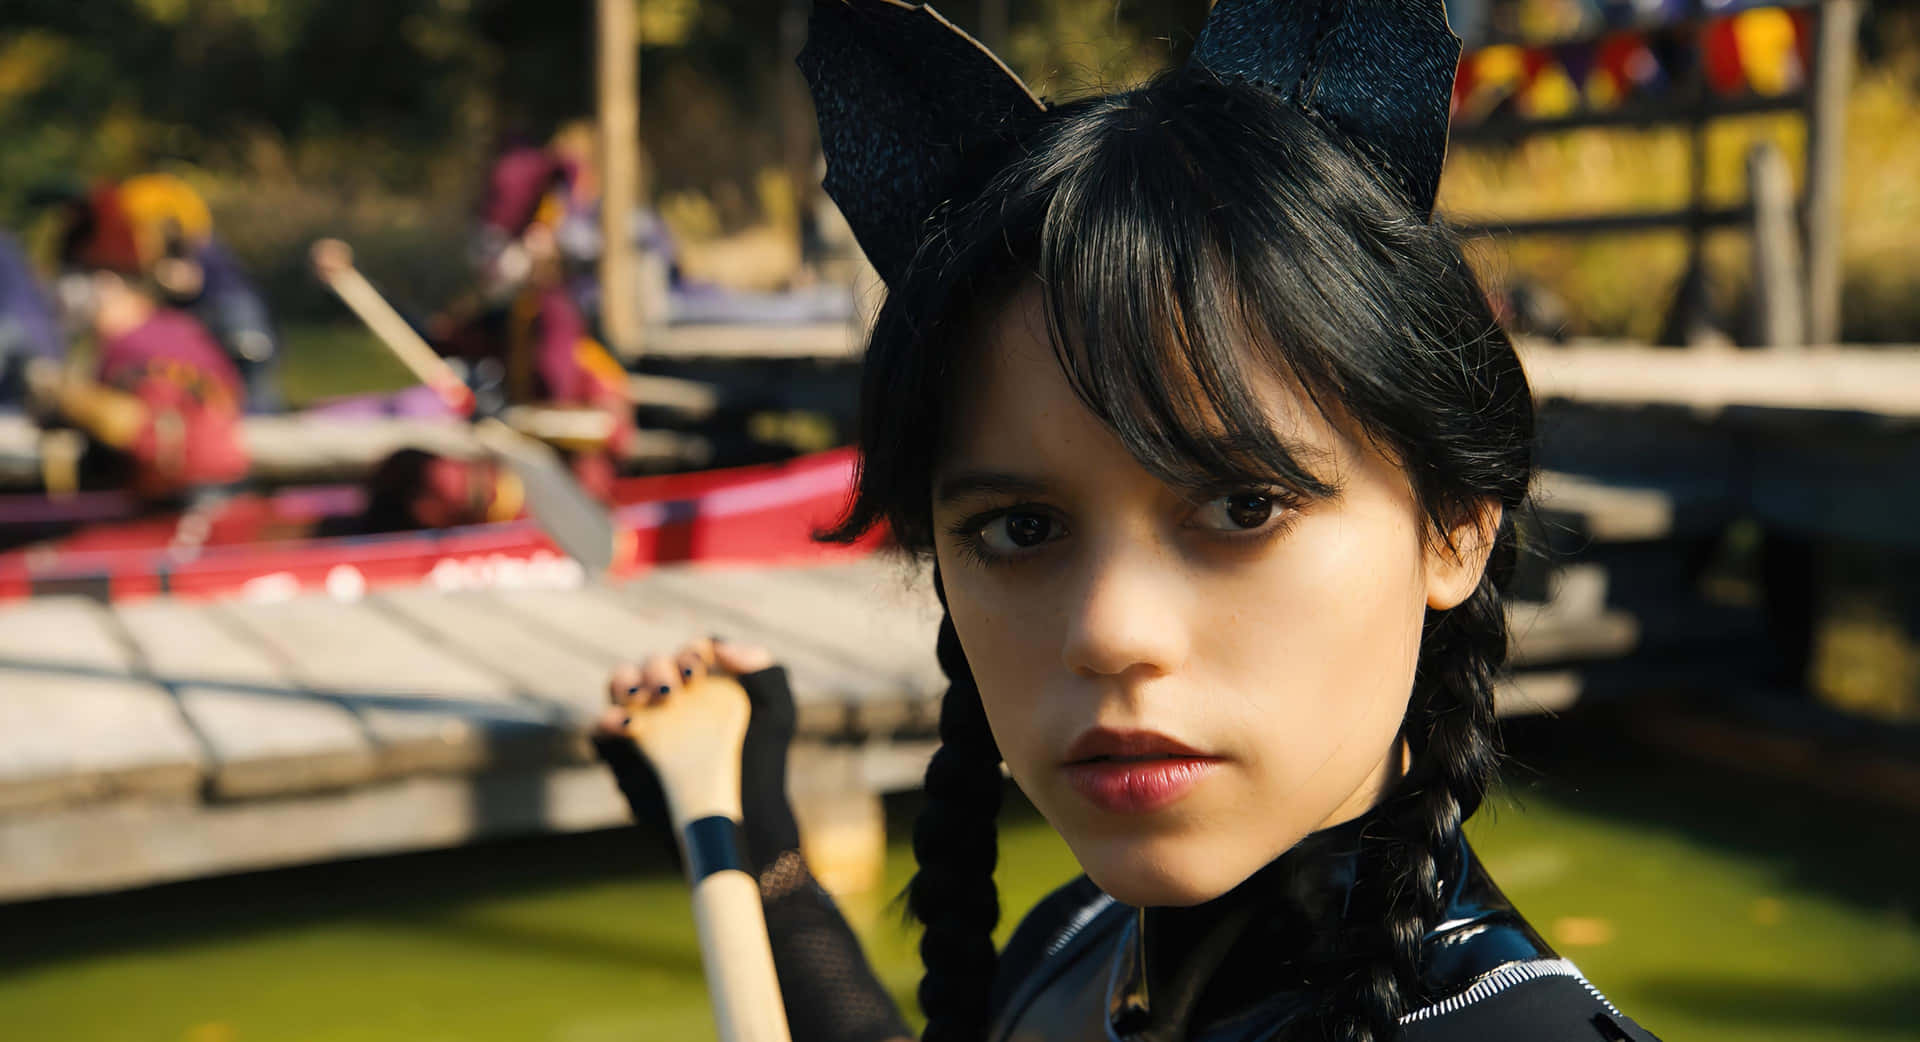 Wednesday Addams With Cat Ears Outdoors Wallpaper